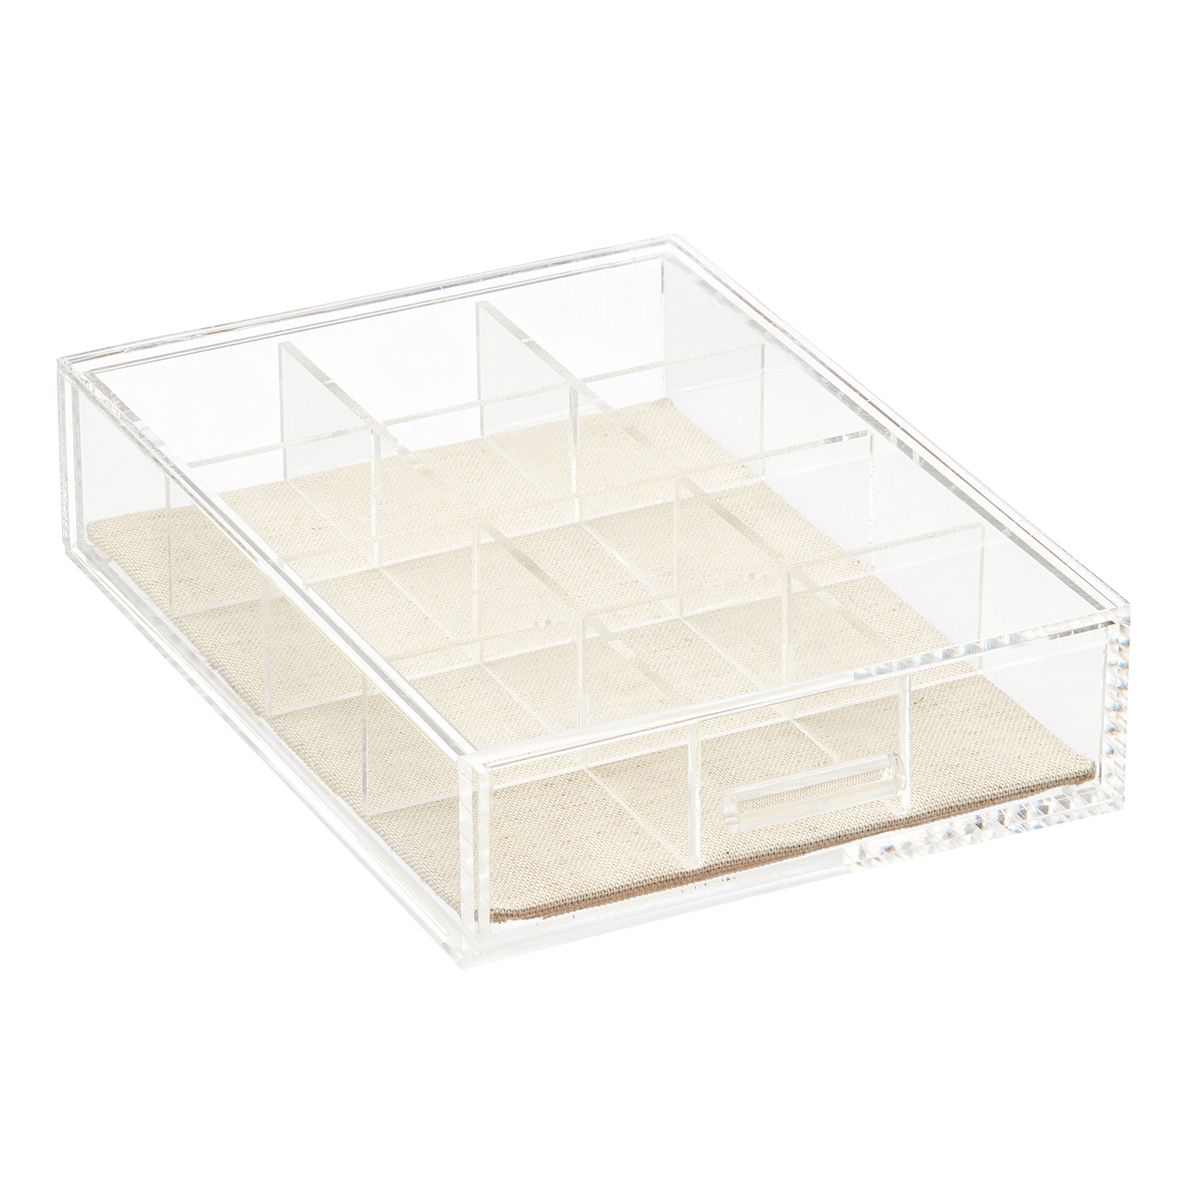 The Container Store 12-Compartment Narrow Luxe Acrylic Jewelry Drawer Clear/Linen | The Container Store